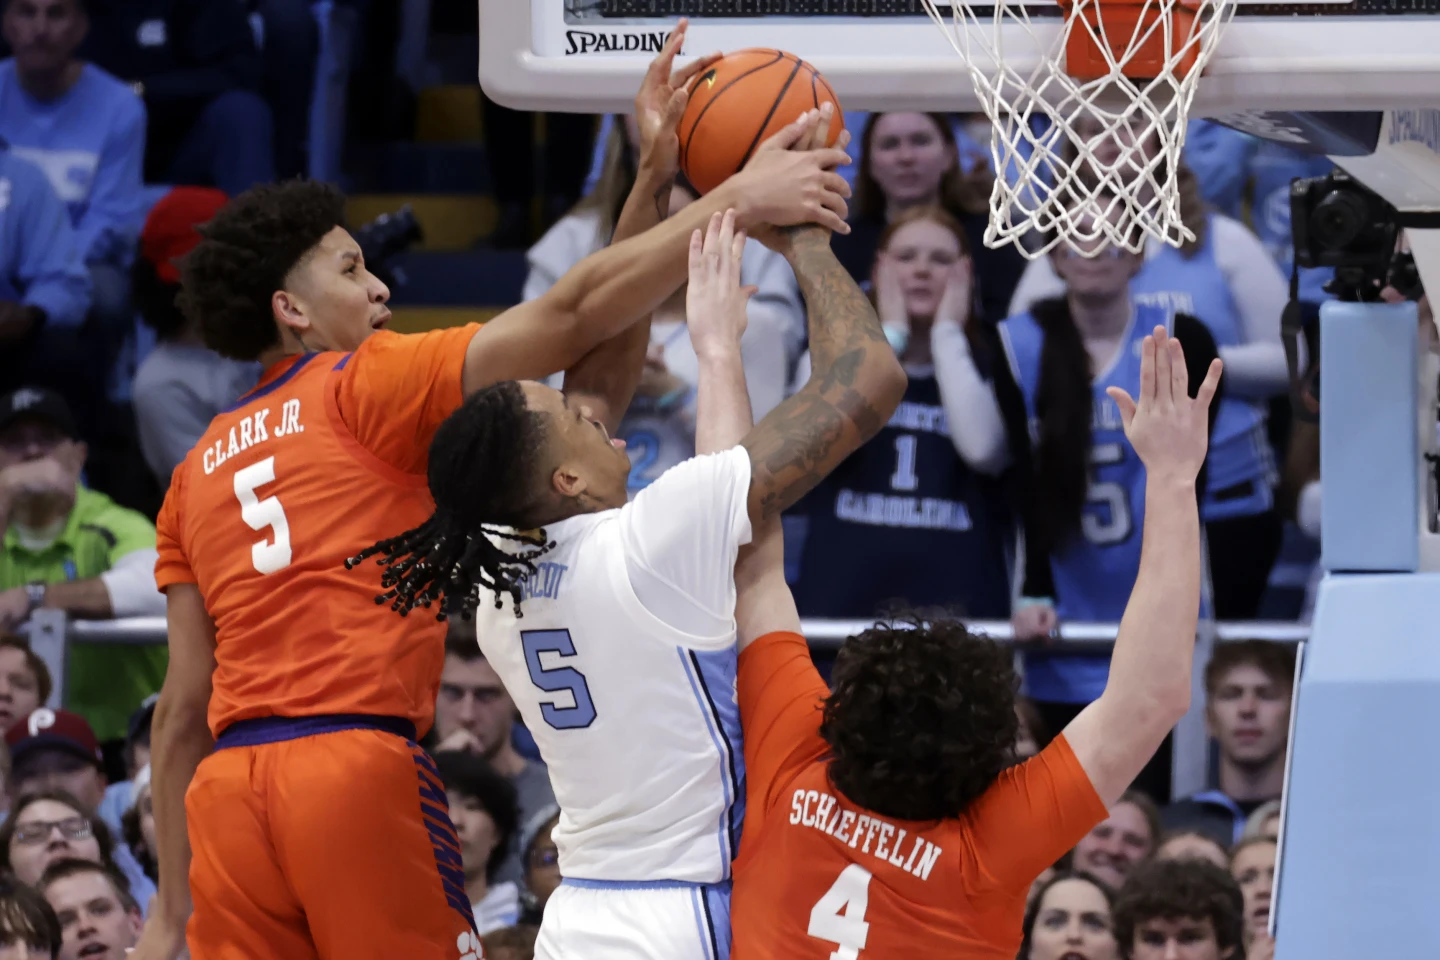 UNC comes out flat, can’t recover against hot-shooting Tigers